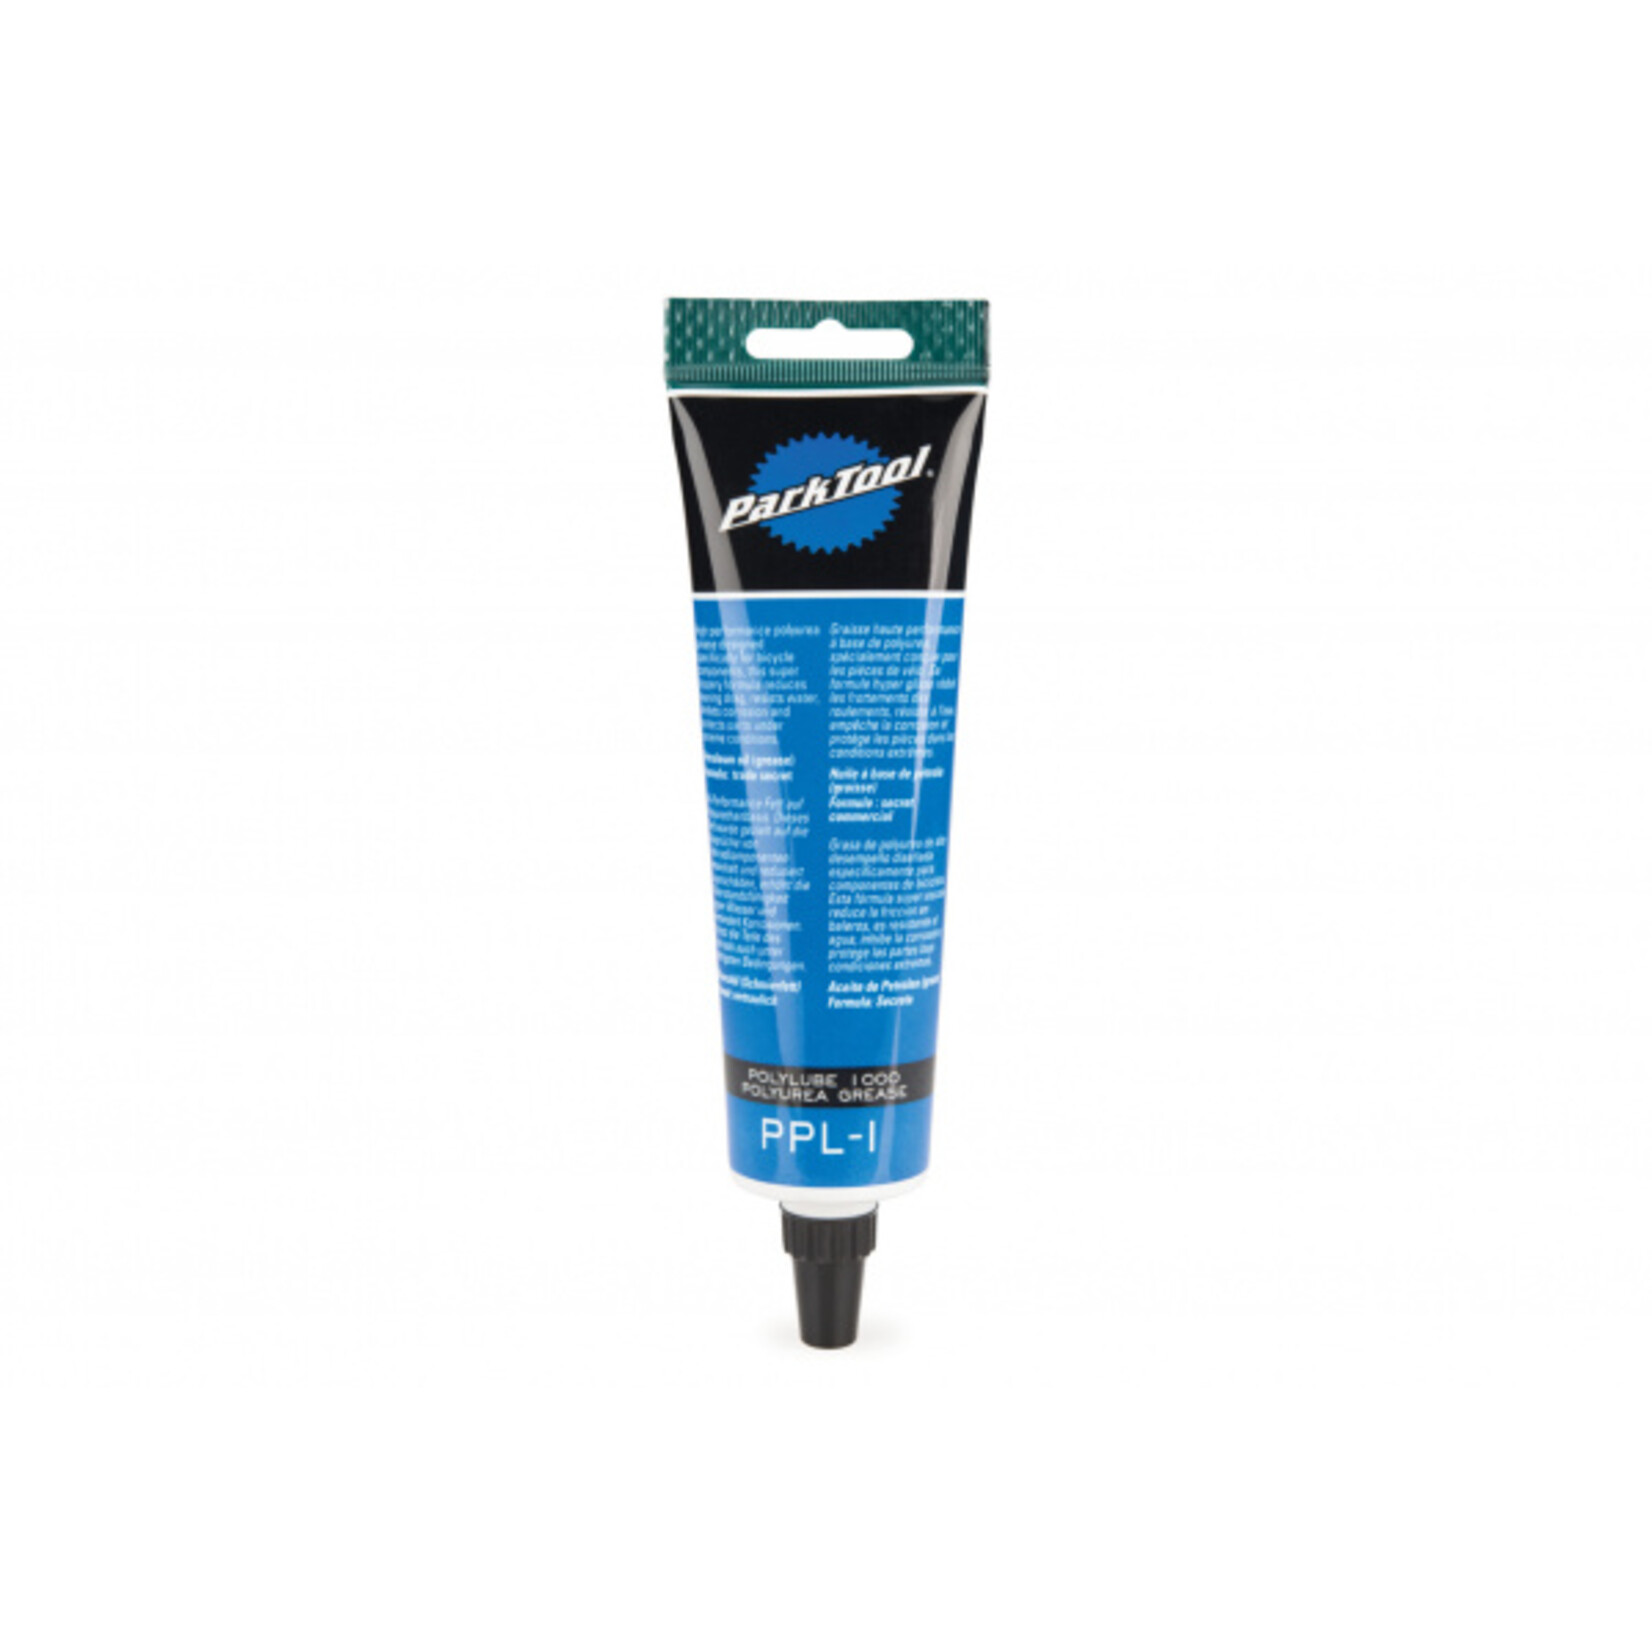 PARK TOOL Park Tool Polylube 1000 Grease  PPL-1 4oz